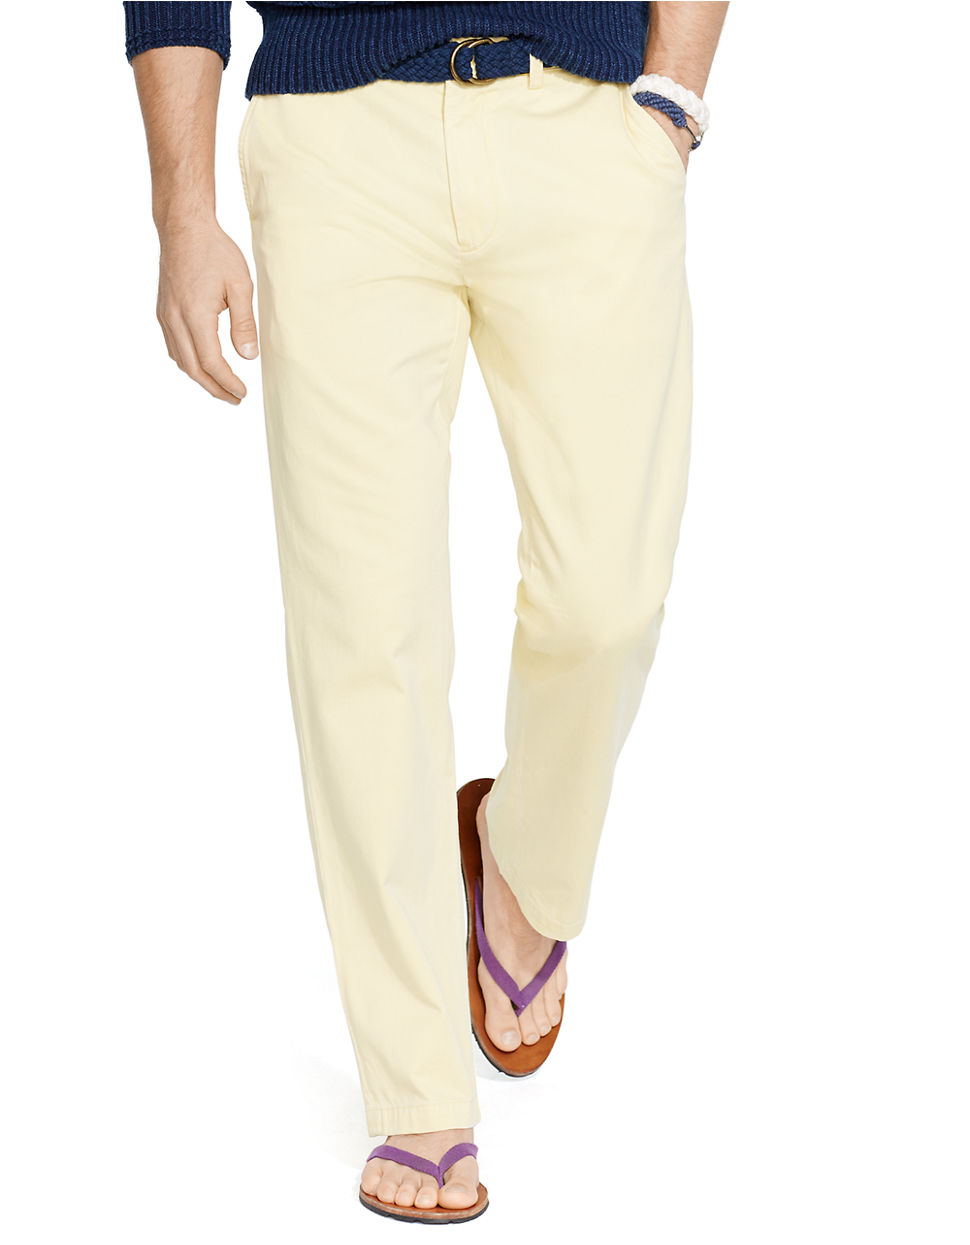 Lyst - Polo Ralph Lauren Flat-Front Cotton Twill Pants in Yellow for Men